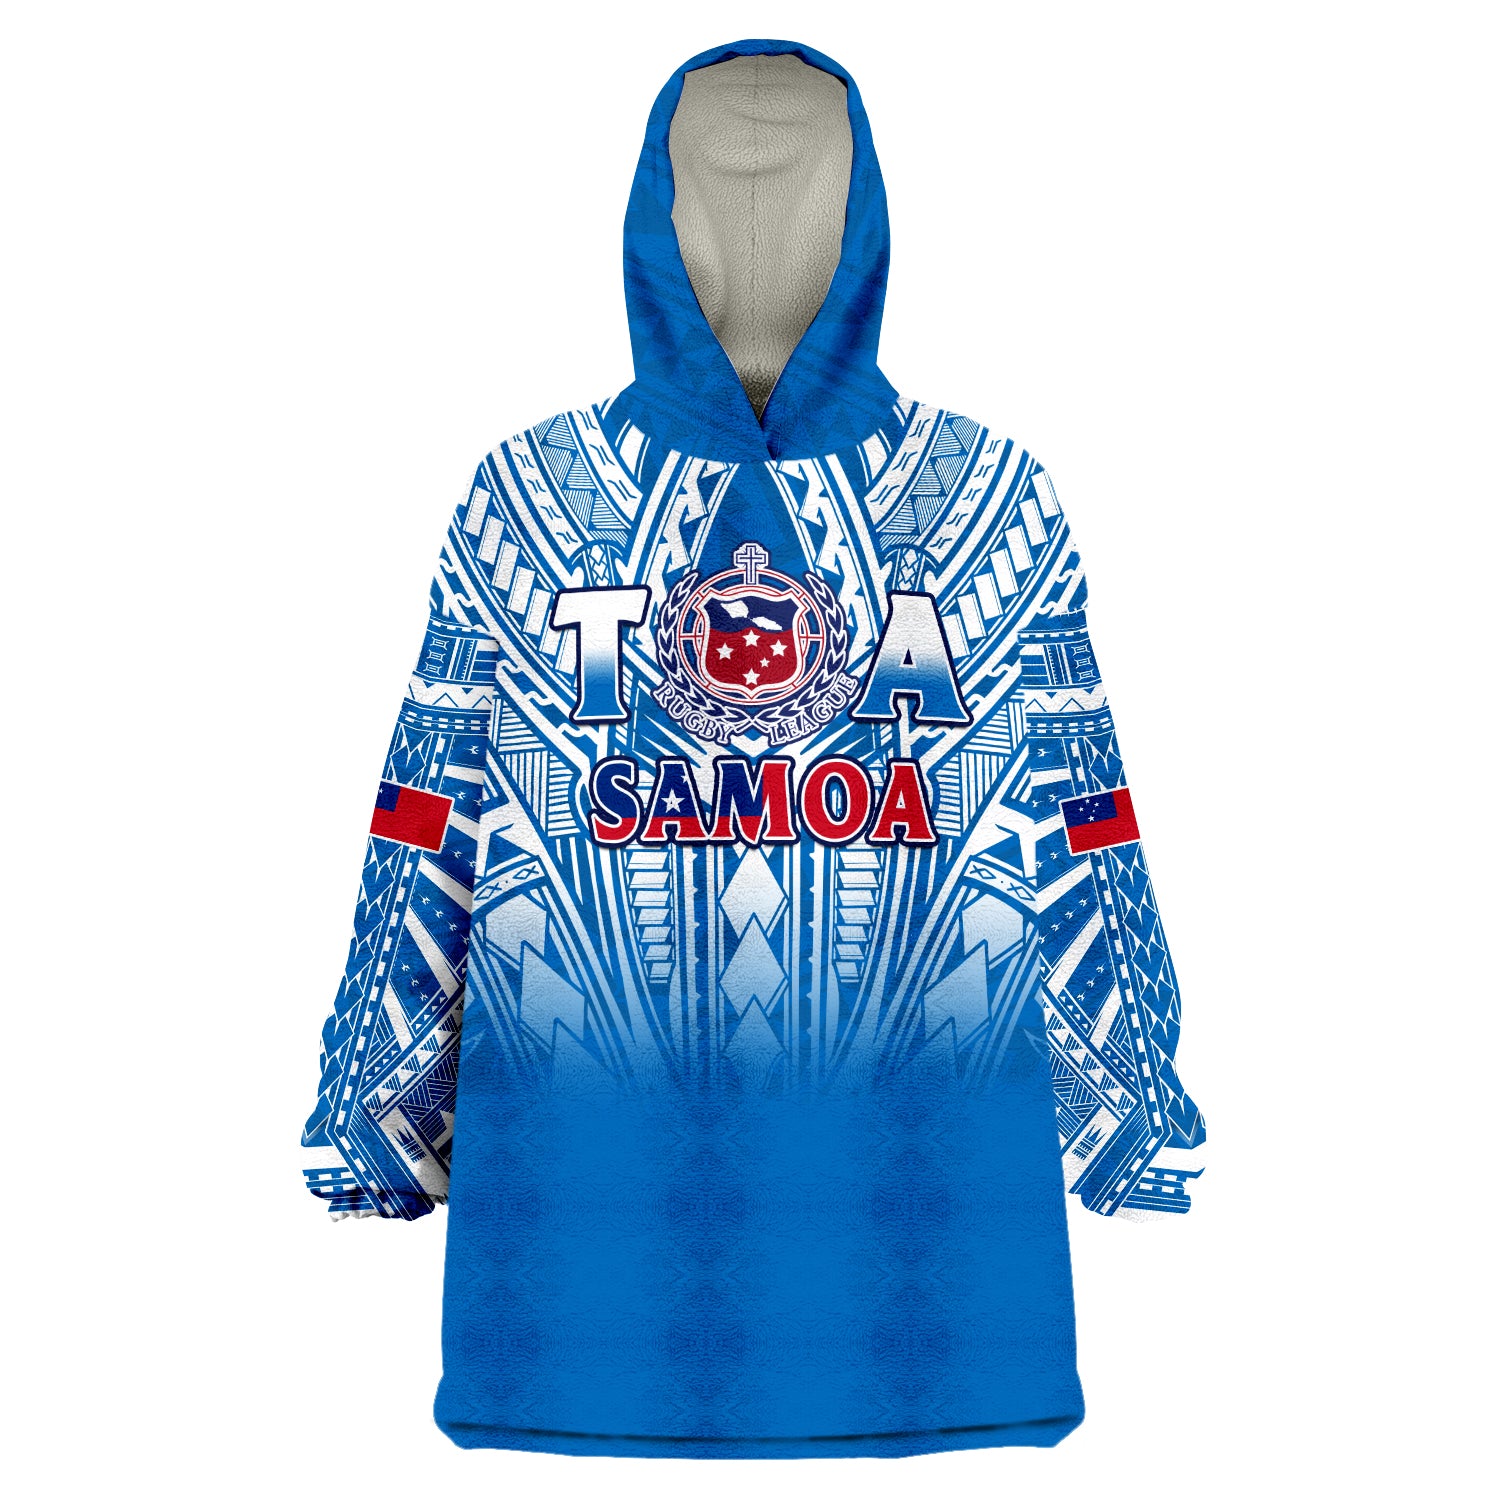 (Custom Text And Number) Samoa Rugby Toa Samoa Polynesian Pacific Blue Version Wearable Blanket Hoodie LT14 Unisex One Size - Polynesian Pride